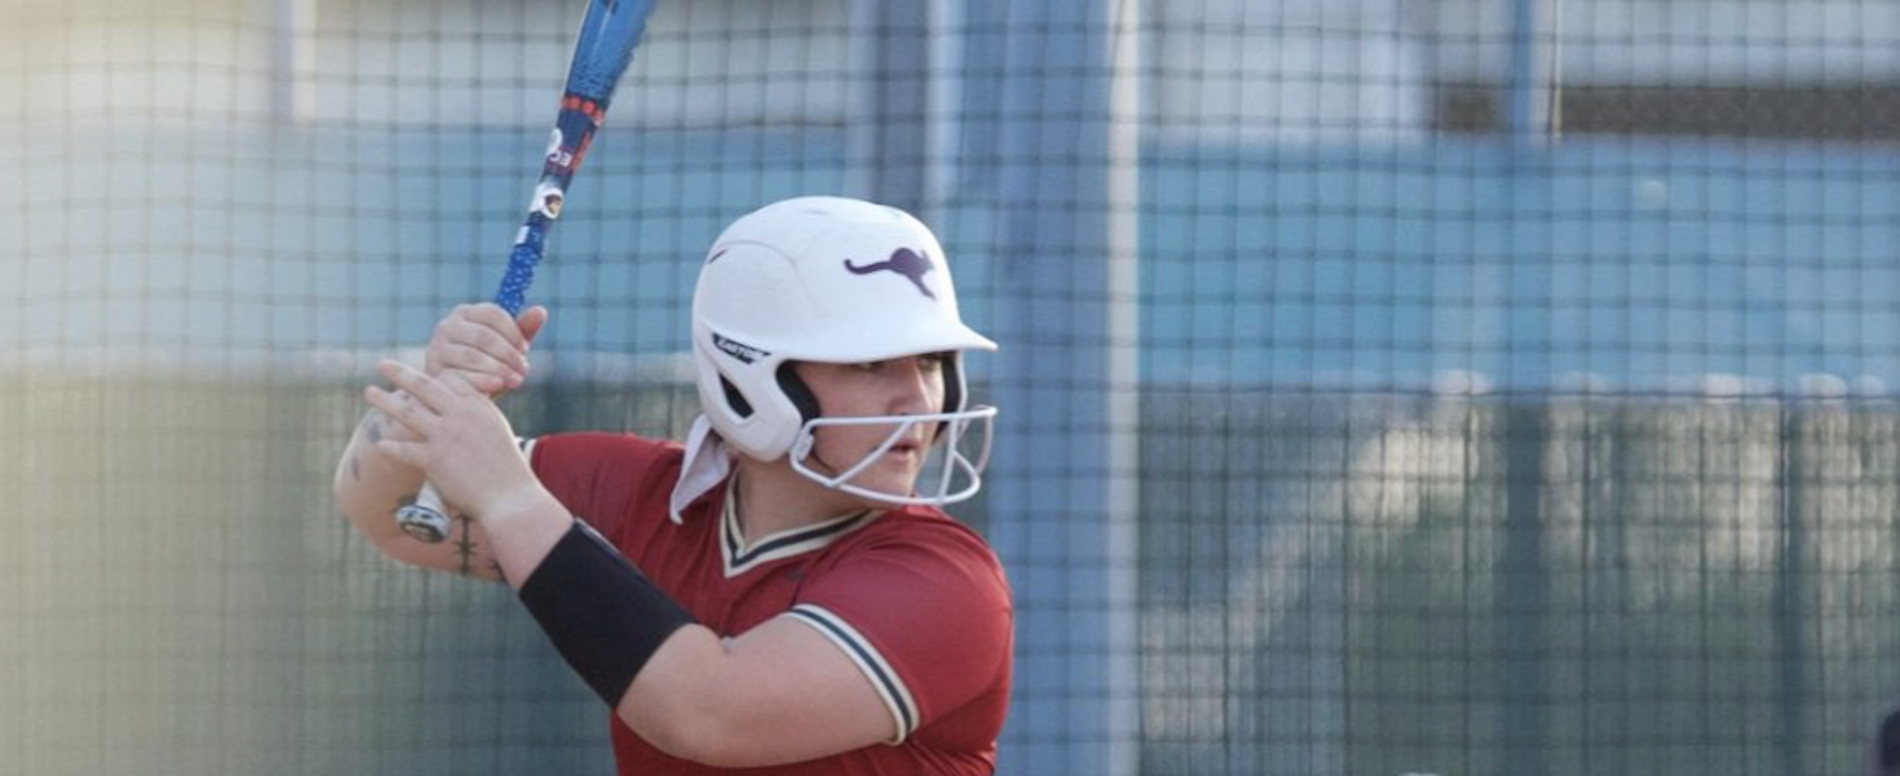 Bulldogs Take Two From 'Roo Softball